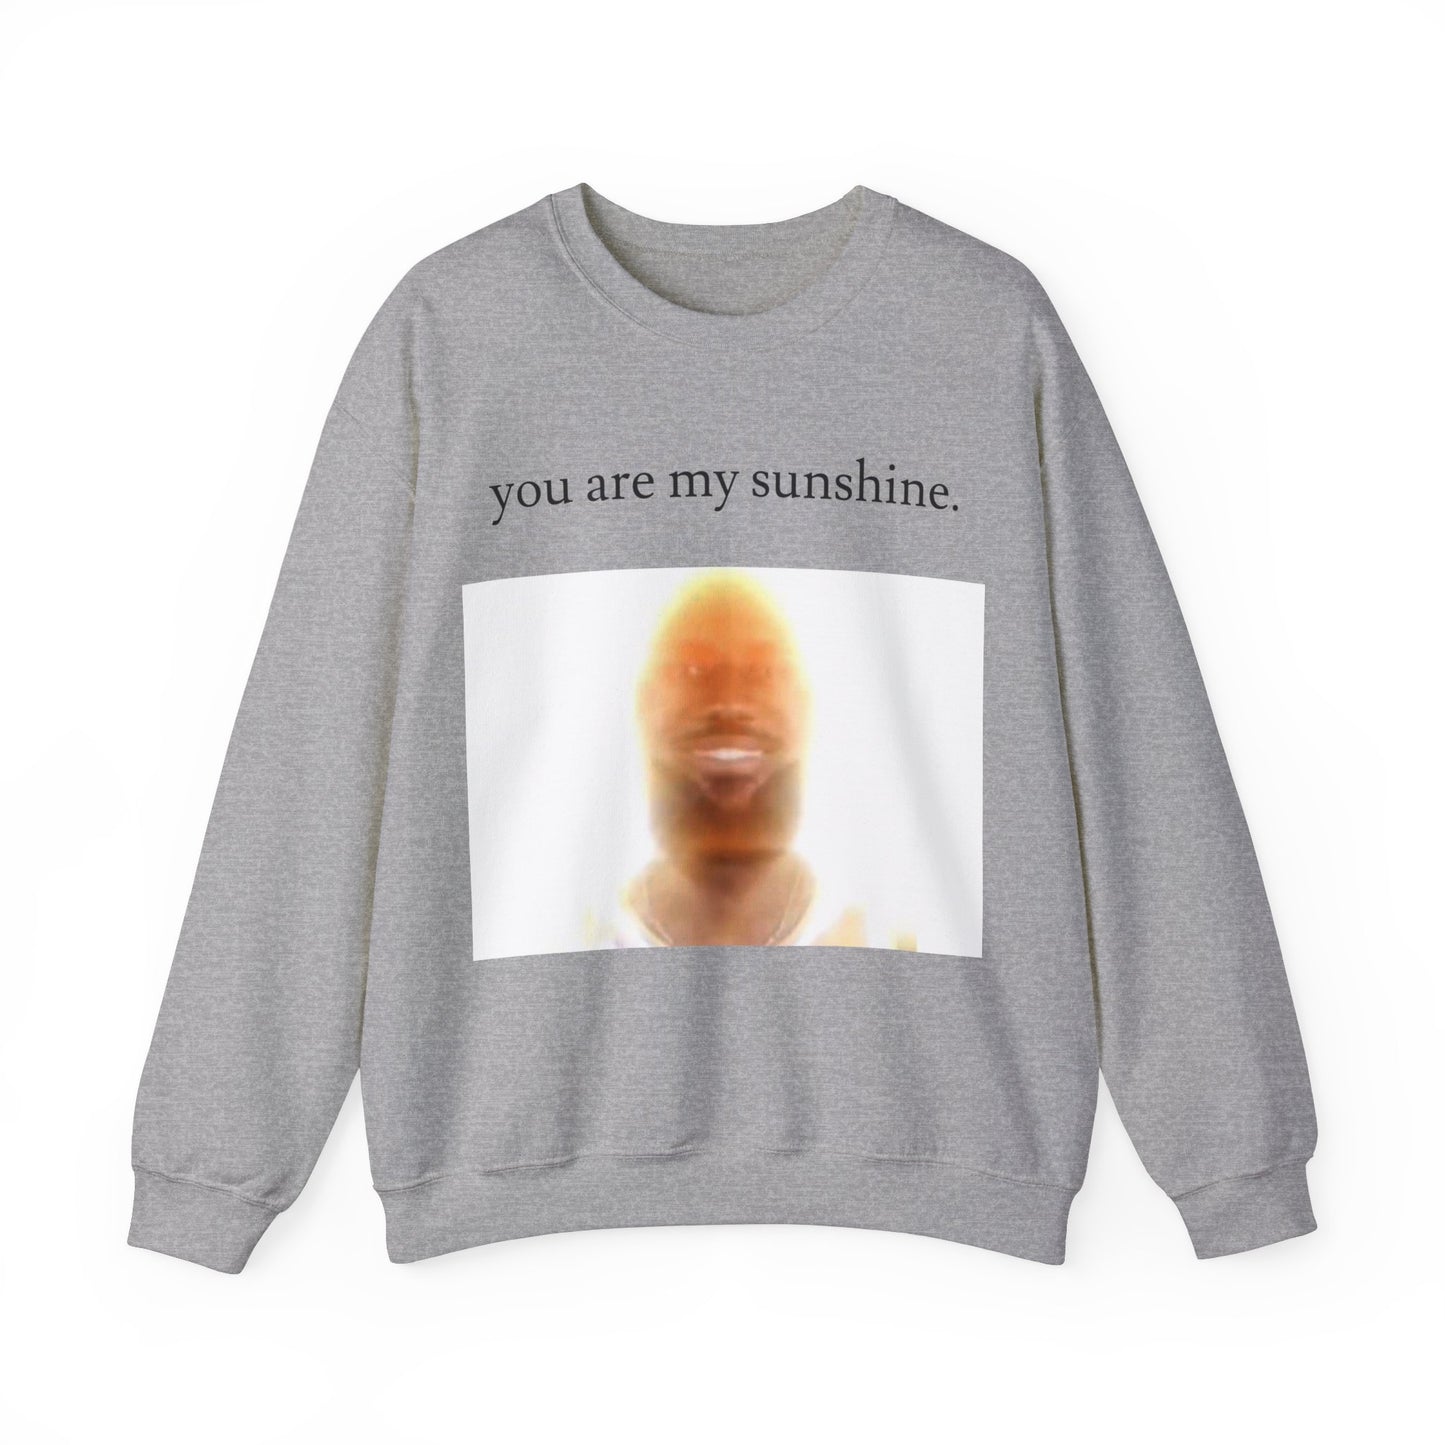 You are my sunshine sweater